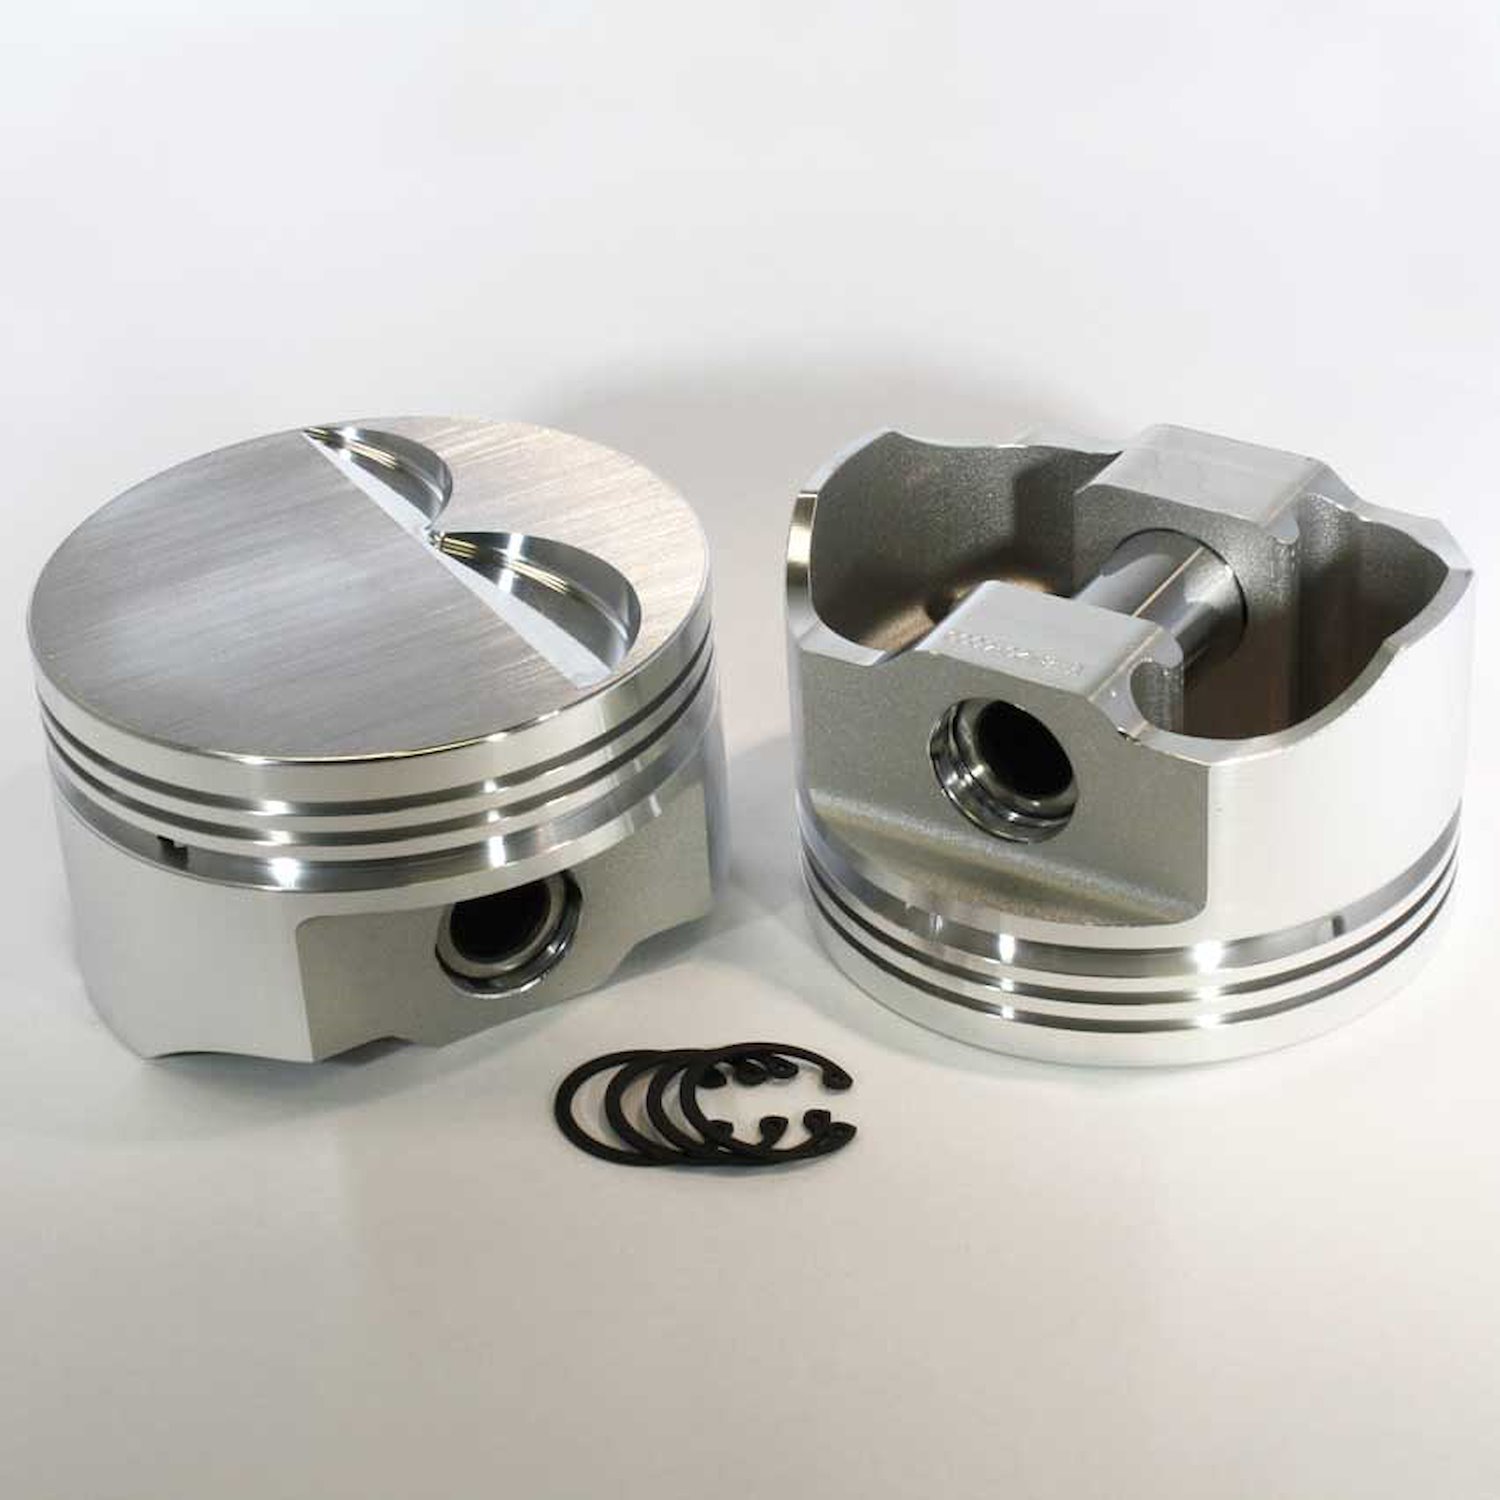 8770-3903 E-Series Flat Top Piston Set for 1997-2005 Chevy LS, 3.903 in. Bore, -3cc Volume [OEM Stroke]